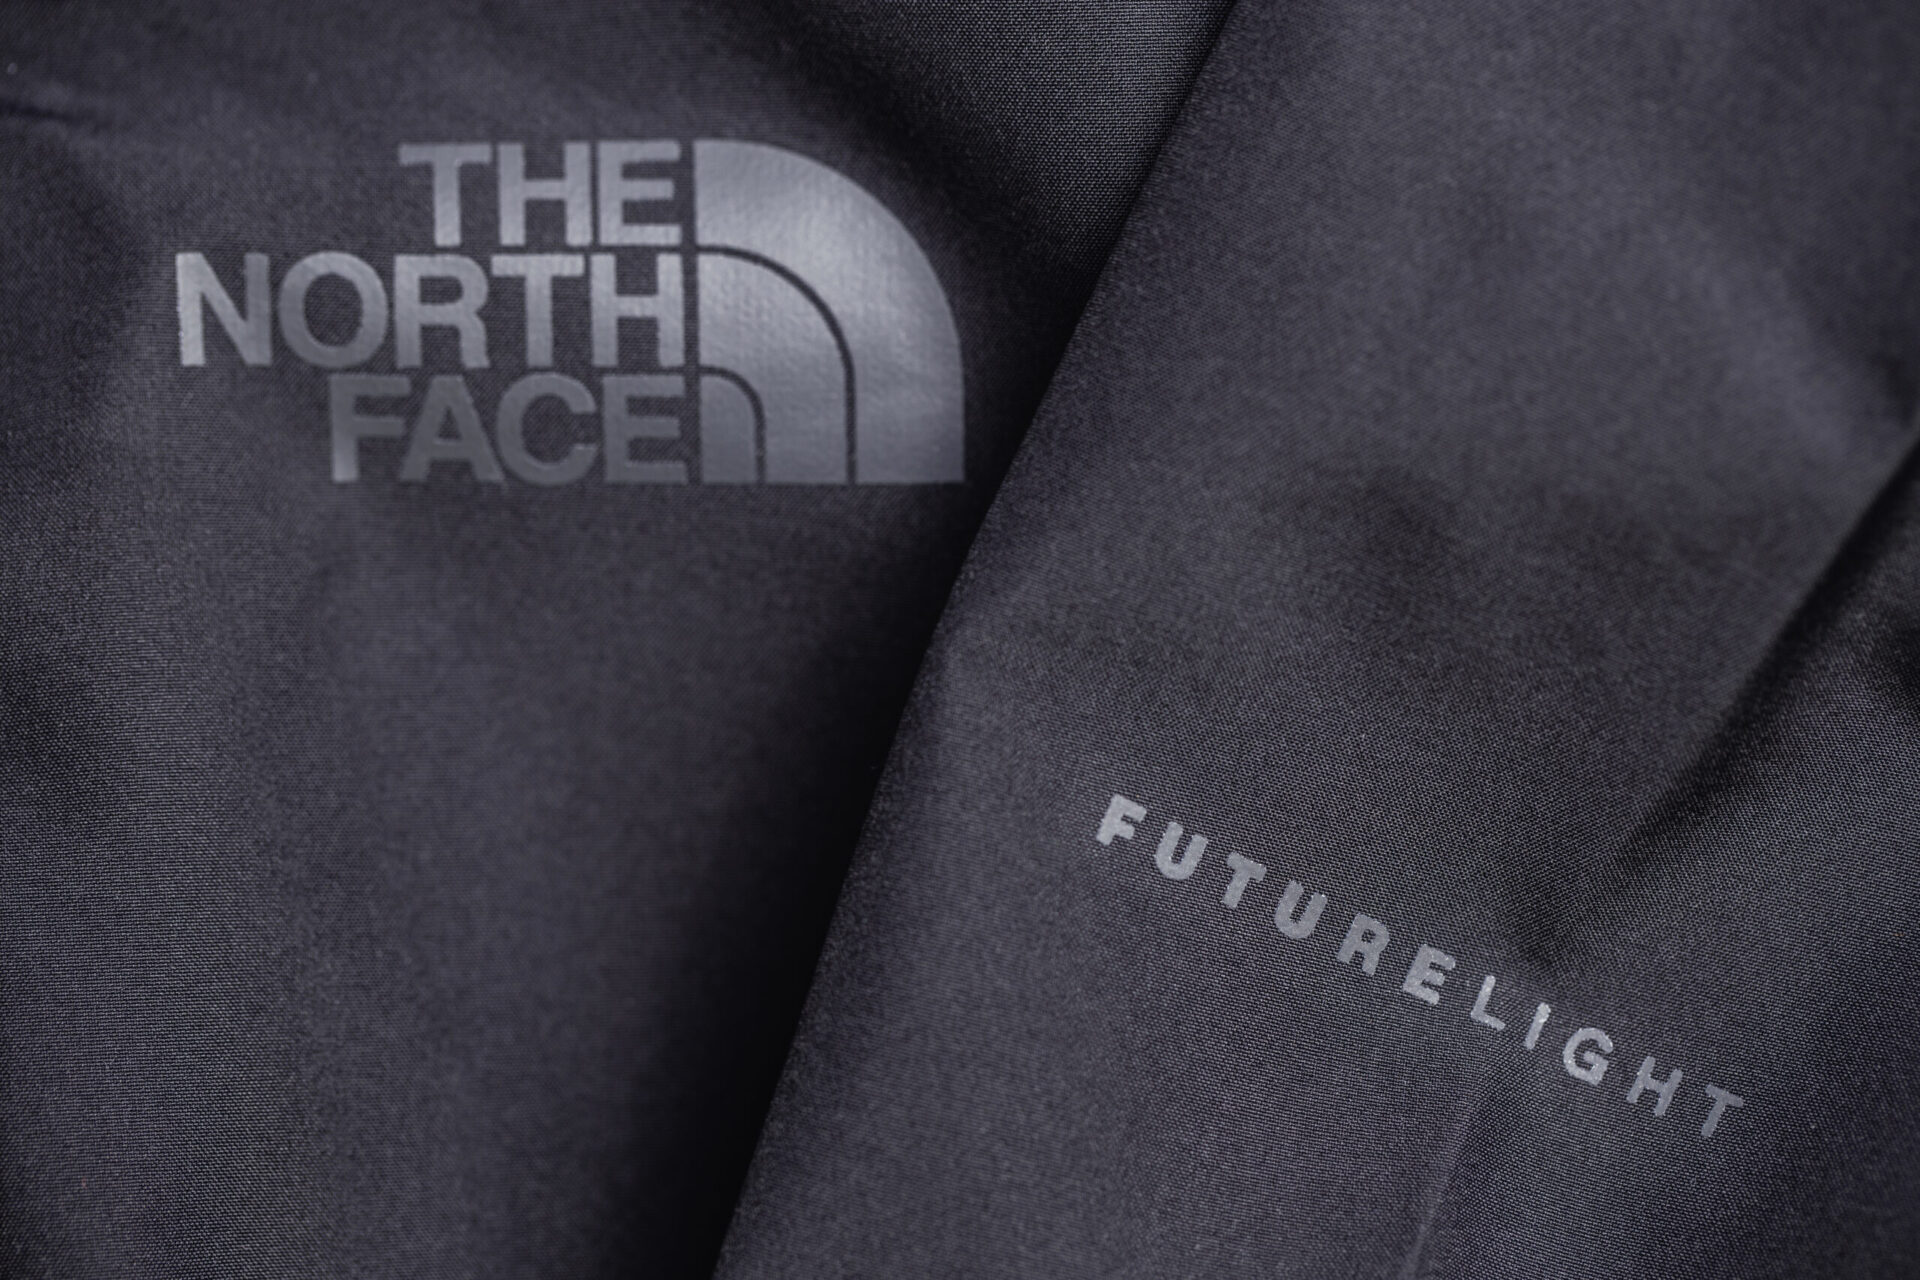 The North Face logo on black jacket with Futurelight technology,